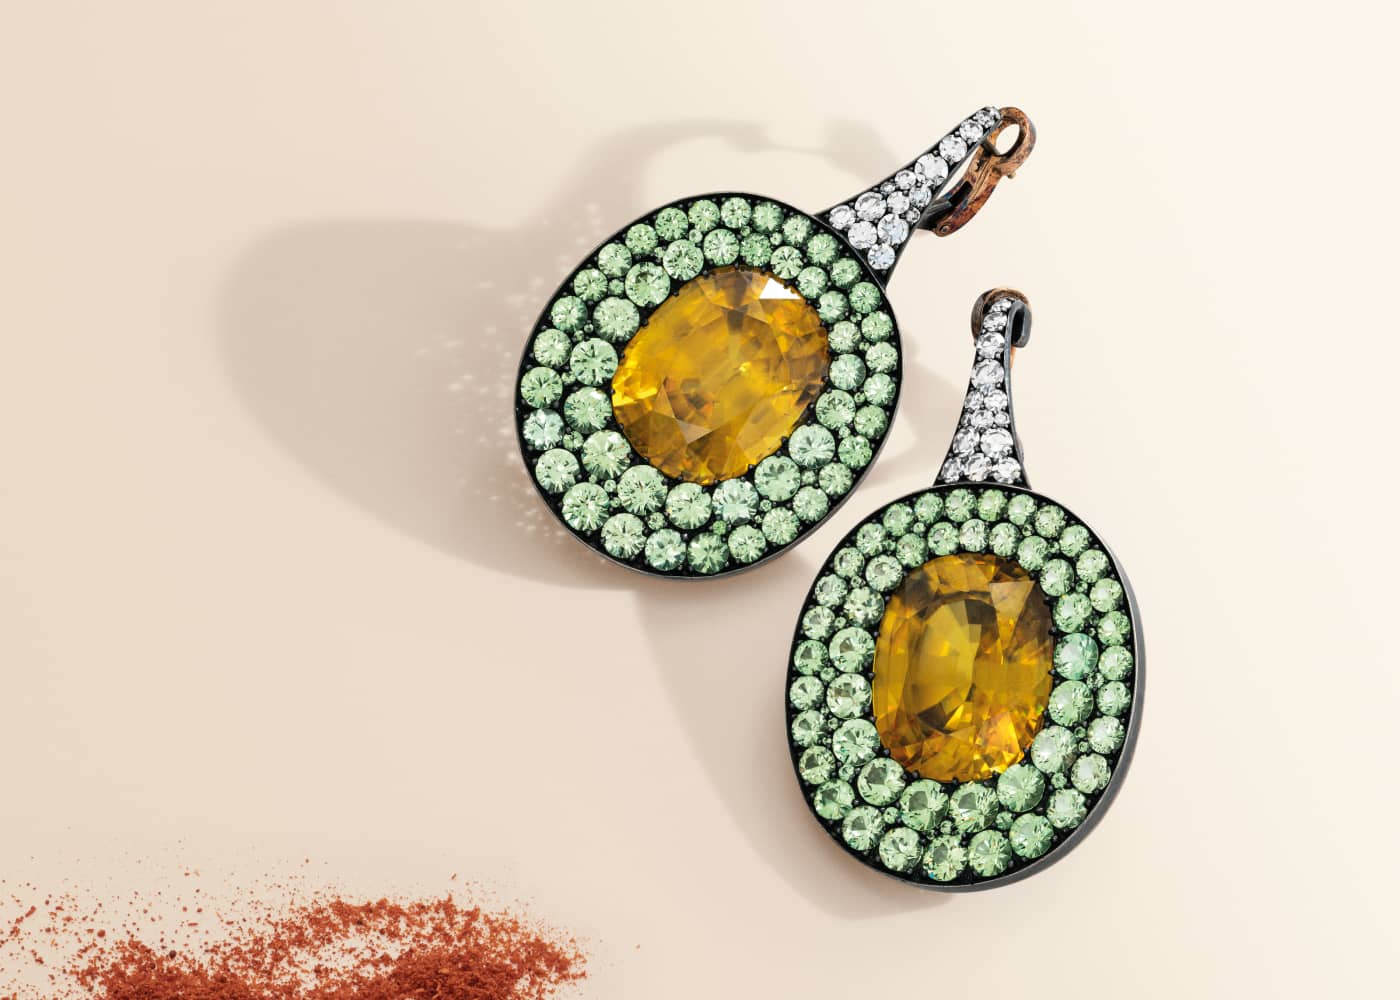 JAR earrings with oval-shaped sphenes, coloured zircon and diamond earrings in gold and silver, due to be sold at the Christie’s Magnificent Jewels auction on 17 May 2023